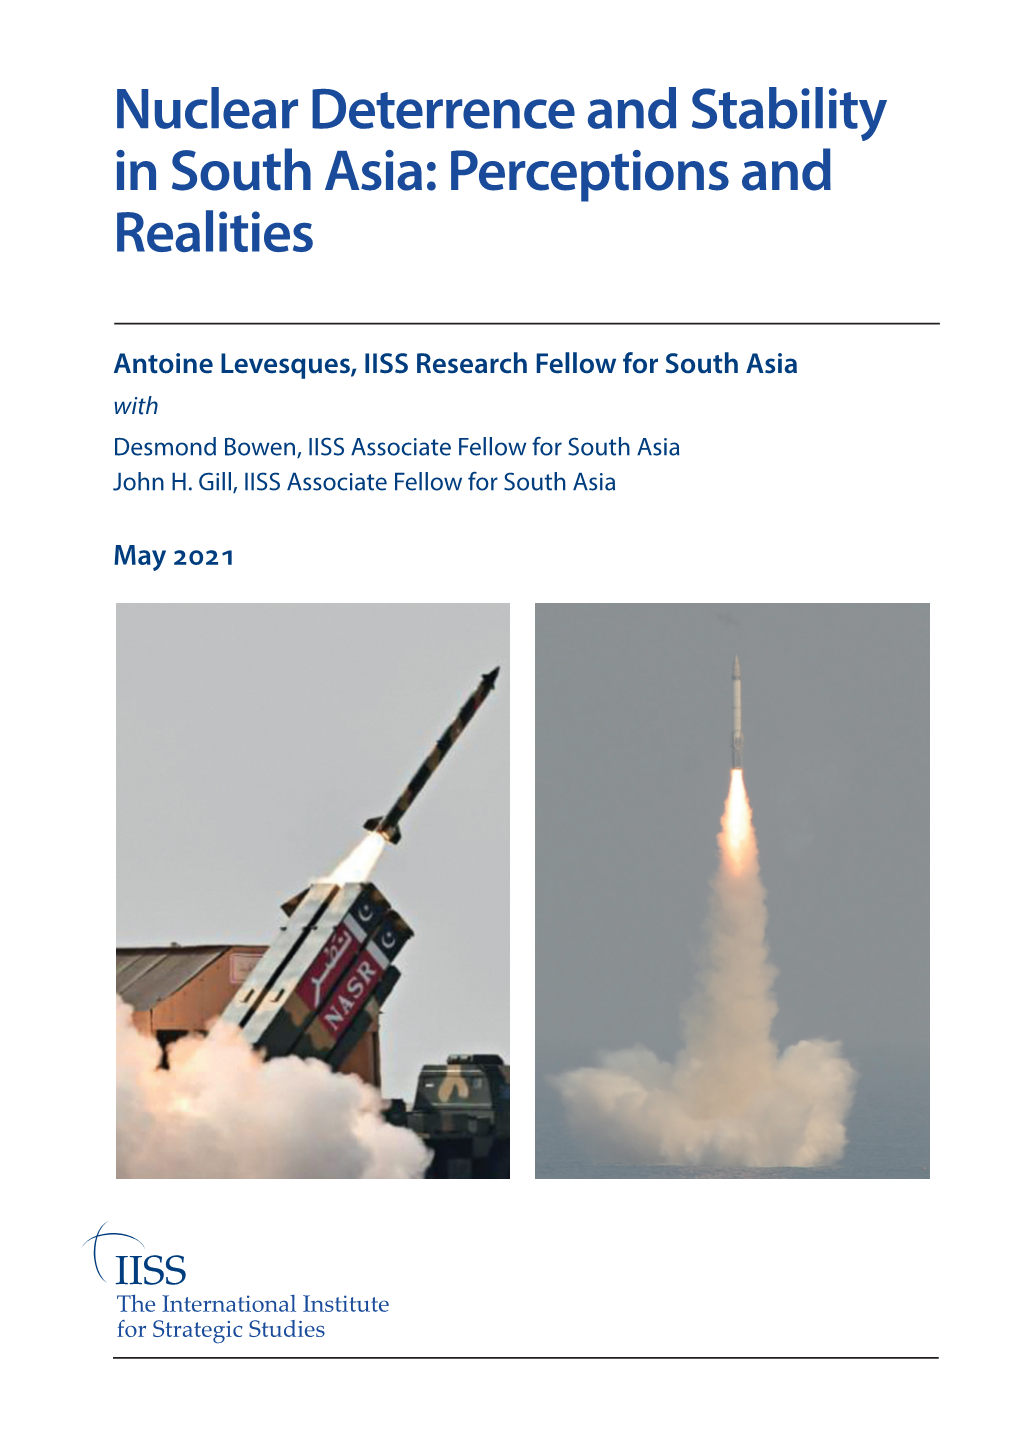 Nuclear Deterrence and Stability in South Asia: Perceptions and Realities